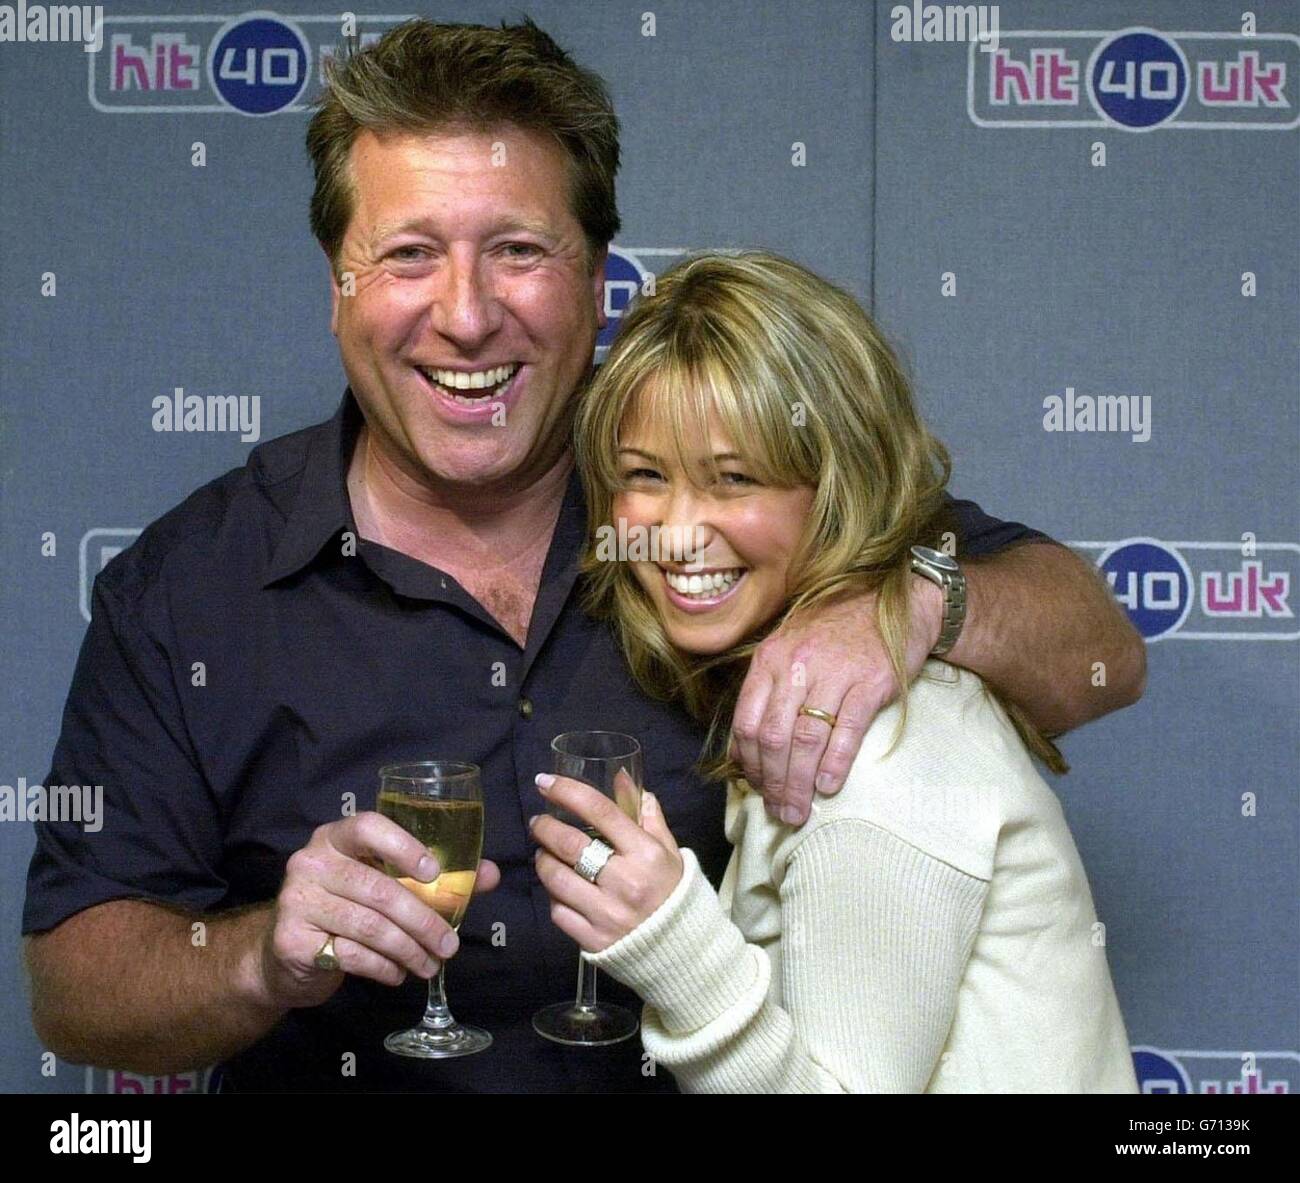 . . Radio DJ Neil Fox celebrates his final Hit40UK show with special guest, singer Rachel Stevens at Capital Radio in Leicester Square, central London. Stock Photo